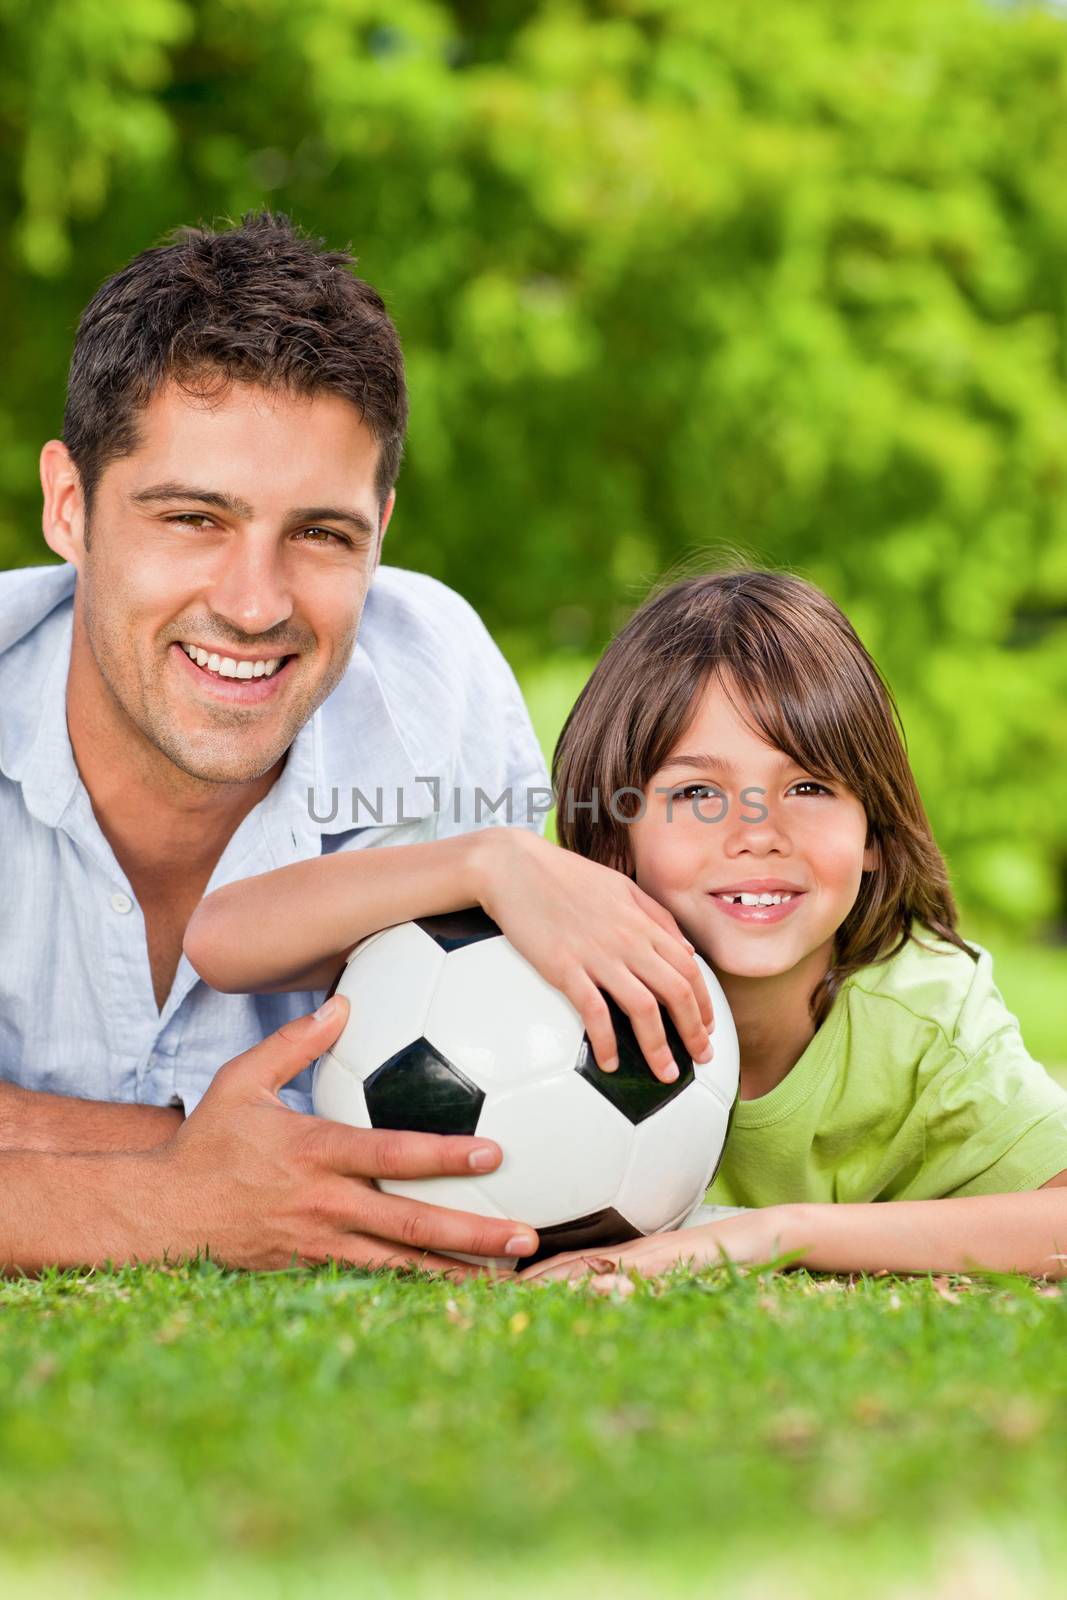 Father and his son with a soccer ball in the park during the summer